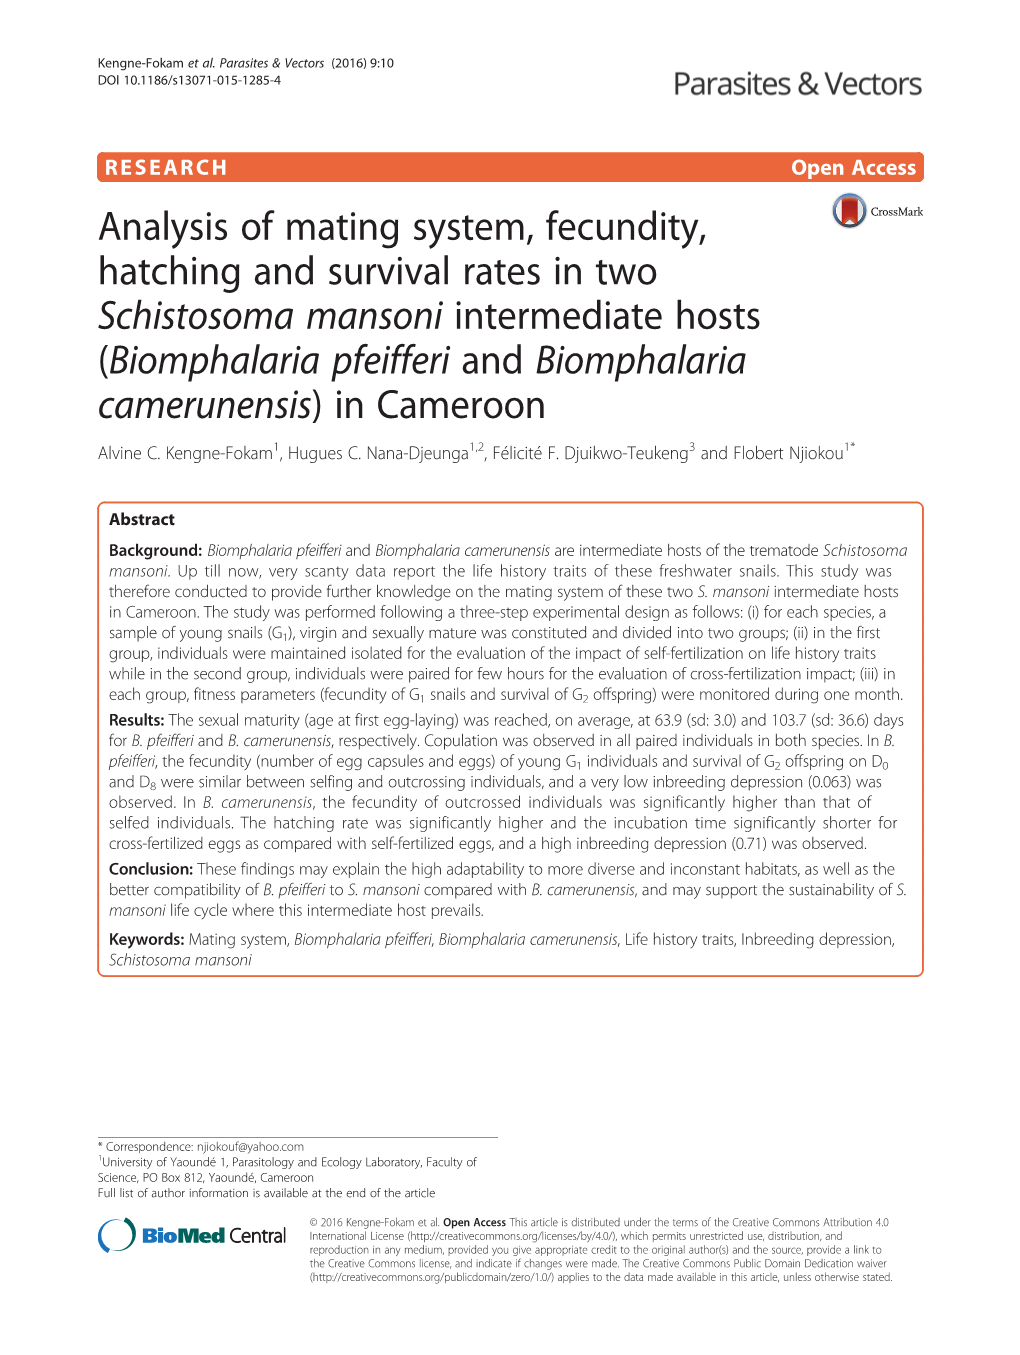 Analysis of Mating System, Fecundity, Hatching and Survival Rates in Two Schistosoma Mansoni Intermediate Hosts (Biomphalaria Pfeifferi and Biomphalaria Camerunensis) in Cameroon